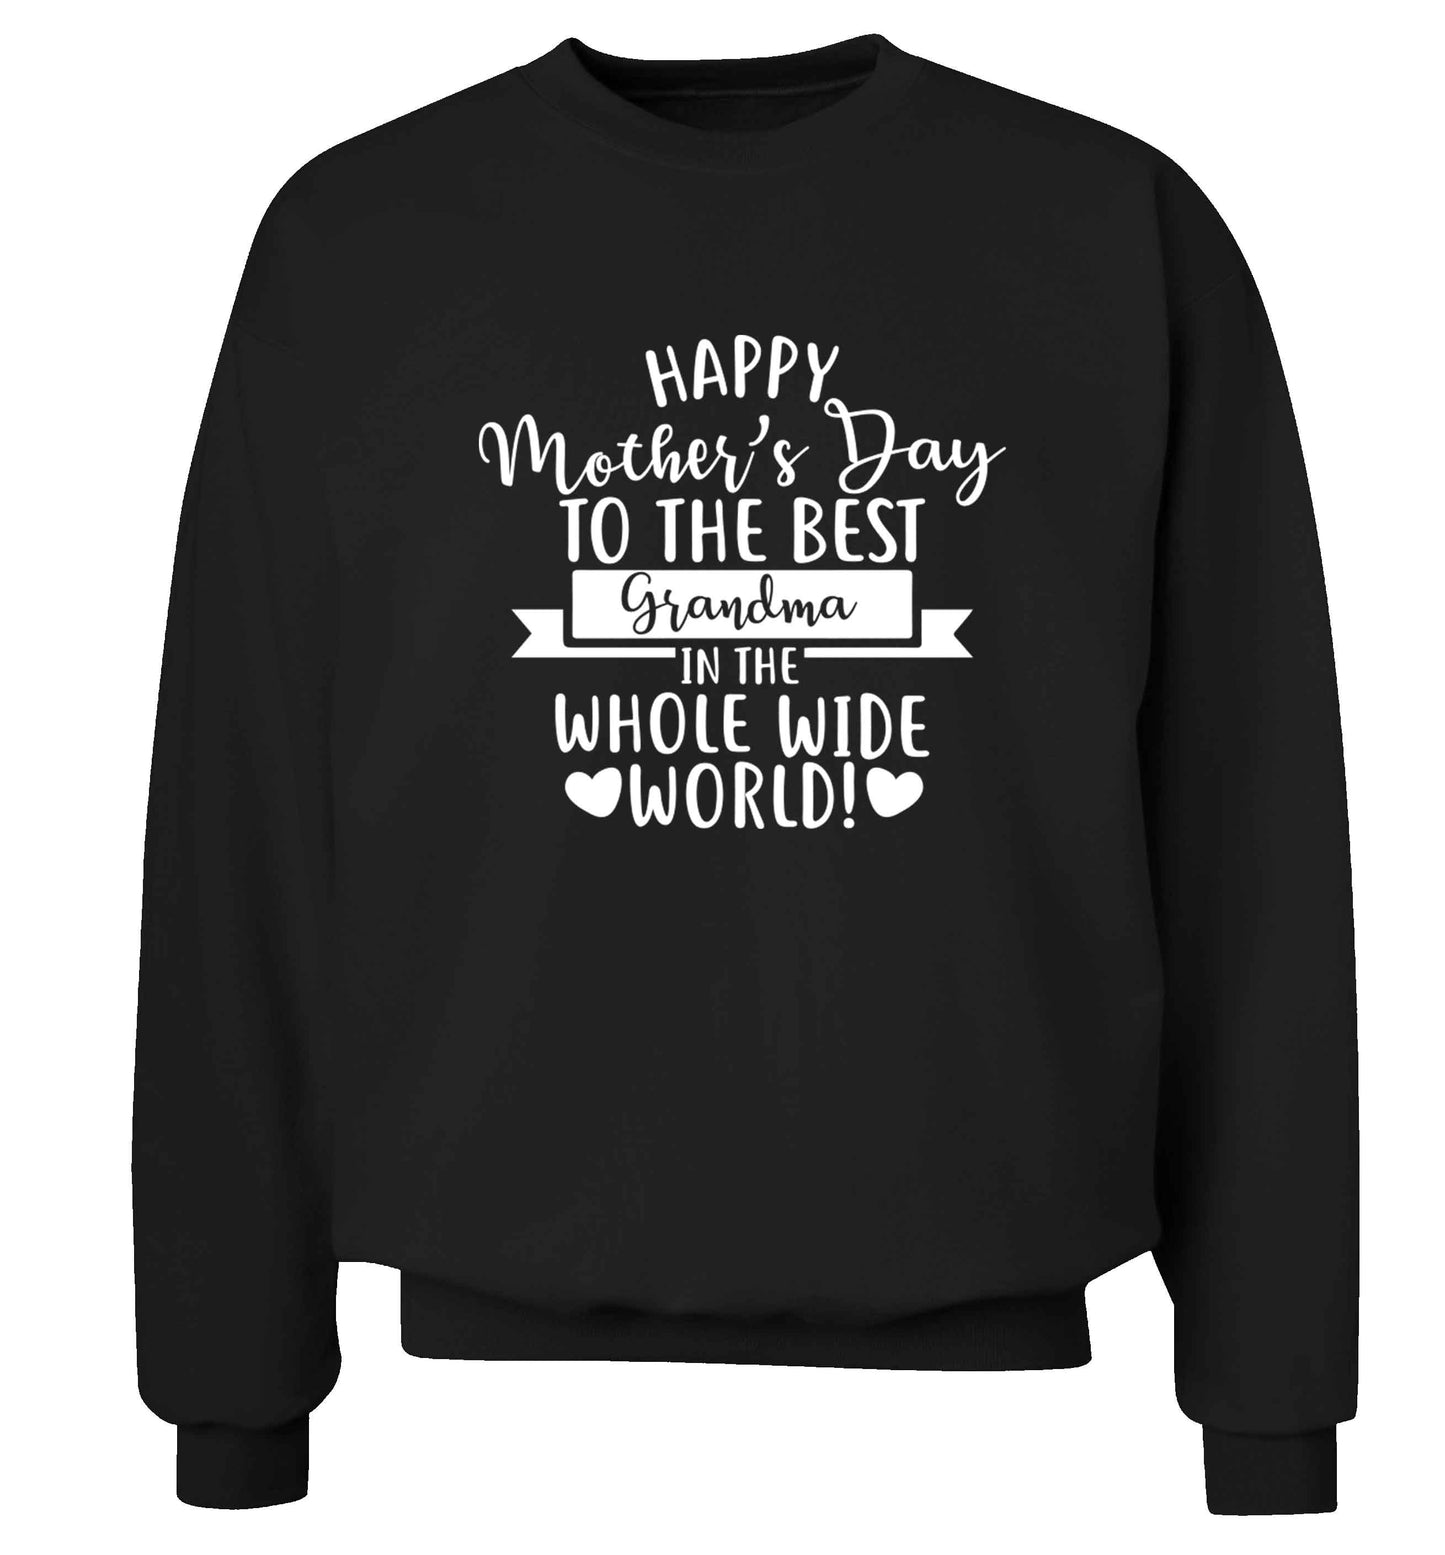 Happy mother's day to the best grandma in the world adult's unisex black sweater 2XL